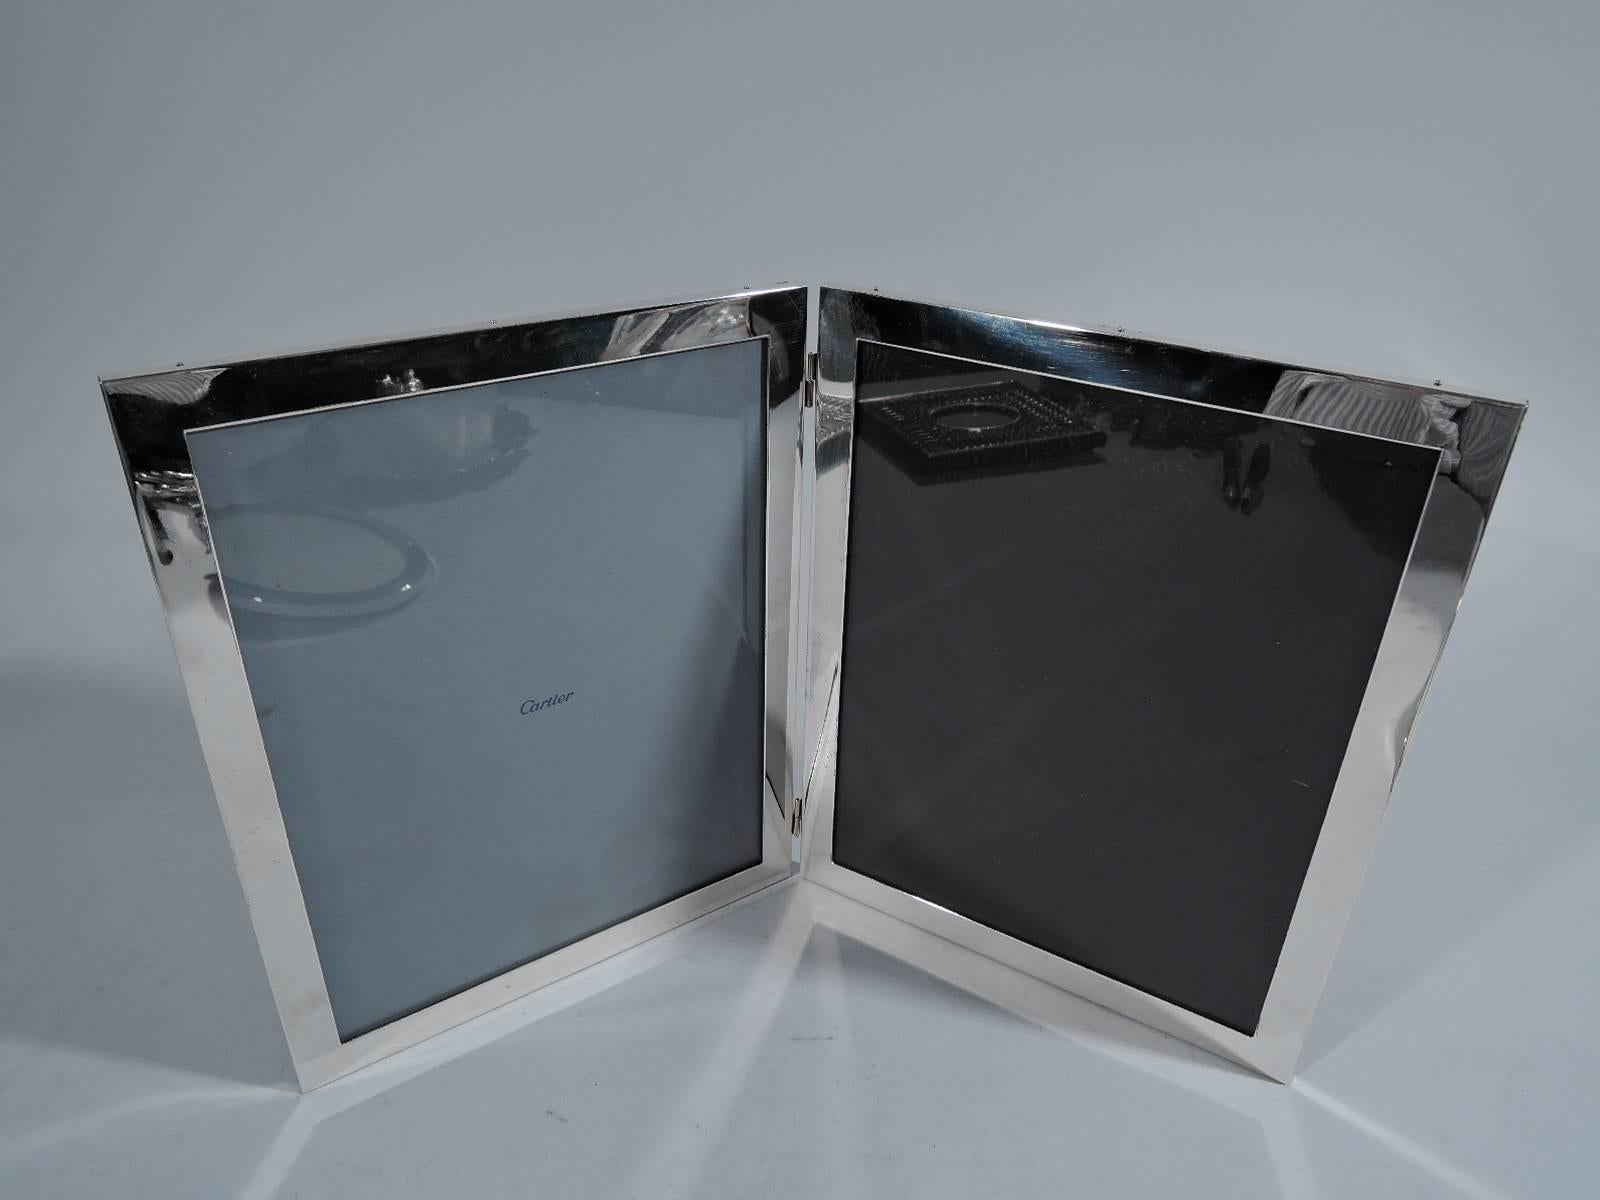 American sterling silver diptych. Two hinged frames, each with flat border, glass and leather back. Hallmarked Raimond, a Massachusetts maker active in the 1960s and 1970s. One window has retailer’s liner for Cartier. 

Dimensions: Each frame 10